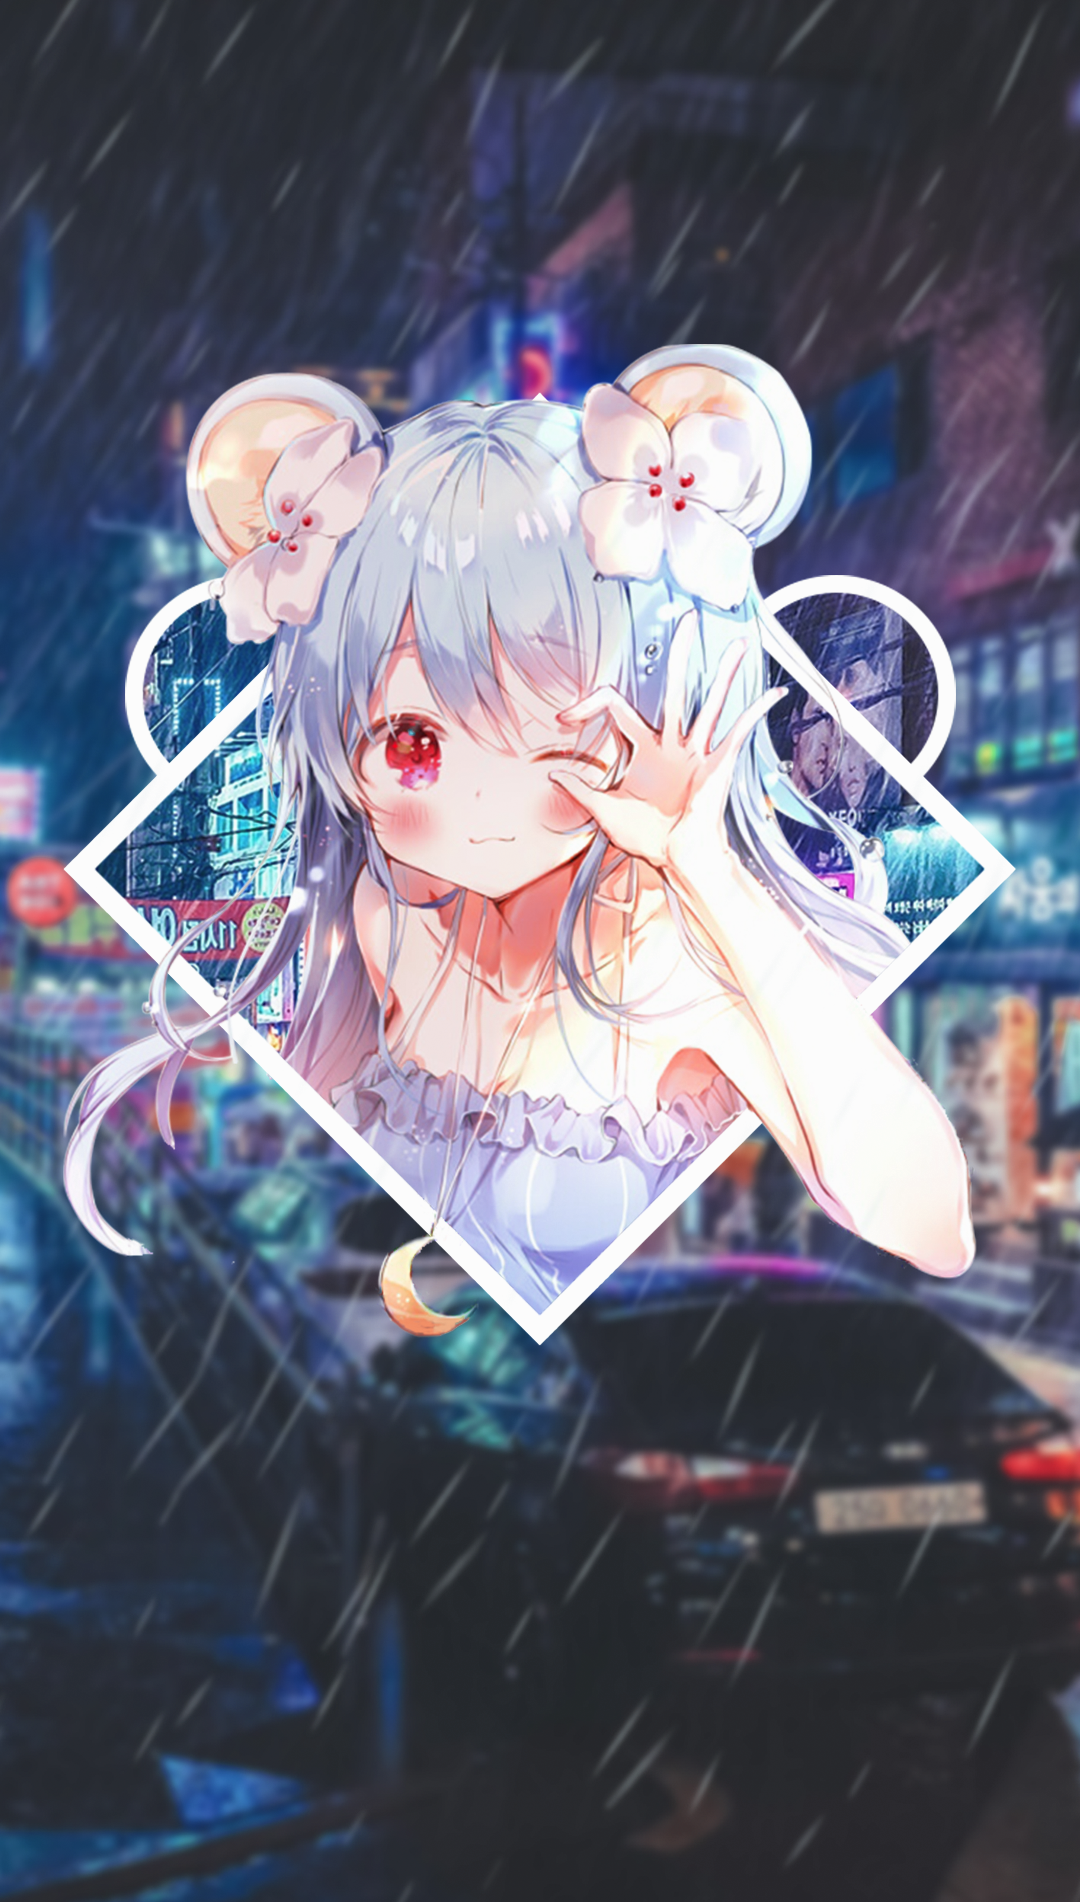 Anime 1080x1902 anime anime girls picture-in-picture road South Korea city neon lights rain cityscape wink mouse ears red eyes blue hair